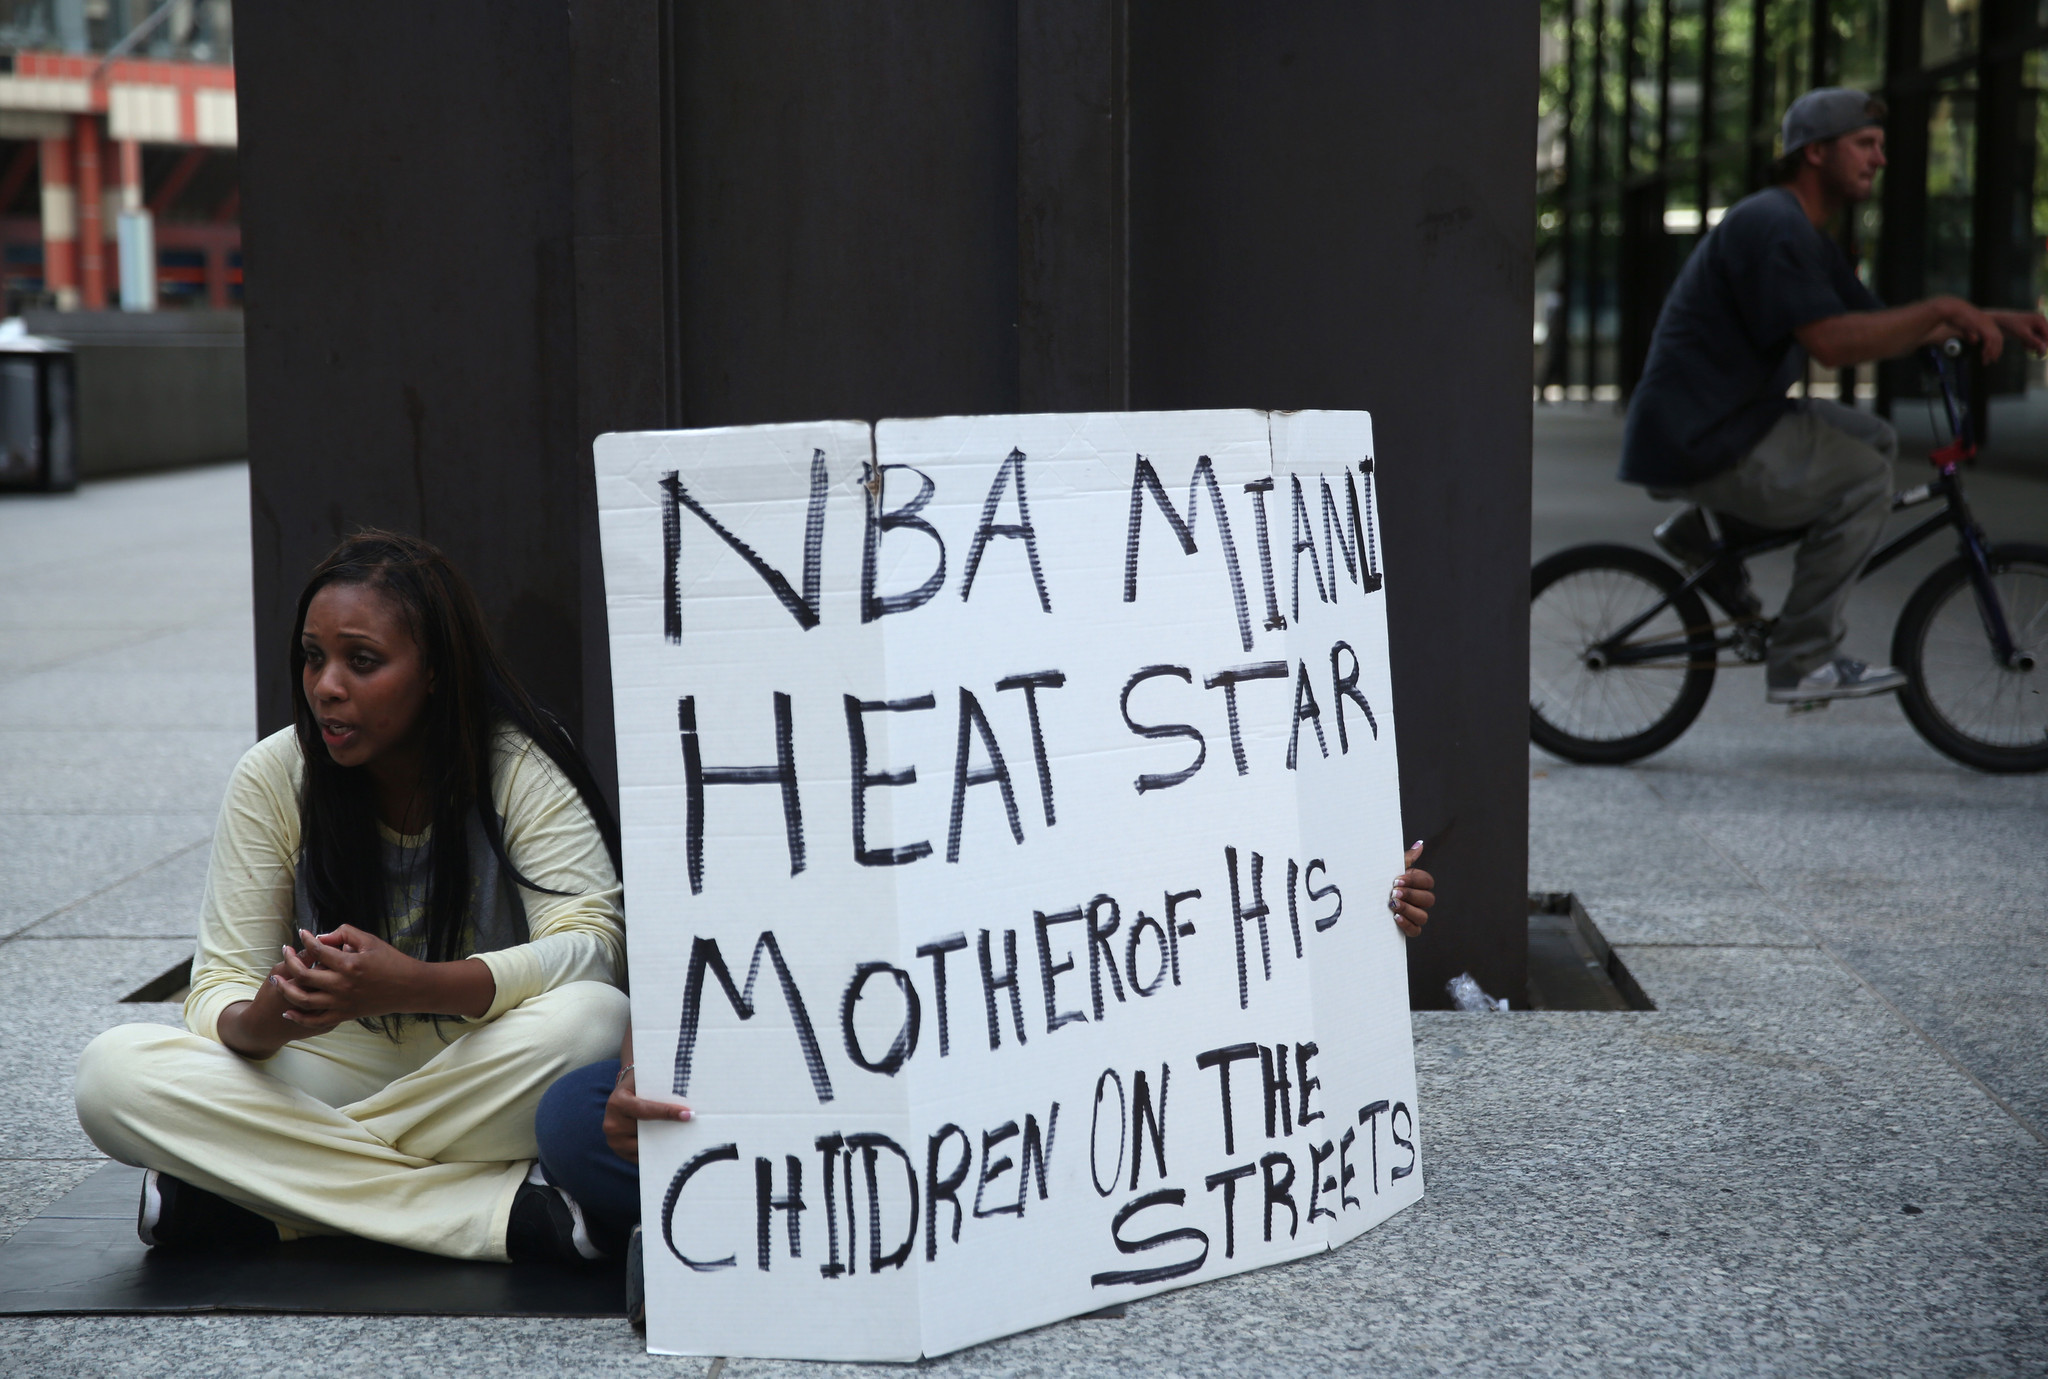 Wade's ex-wife holds personal protest - Chicago Tribune2048 x 1379